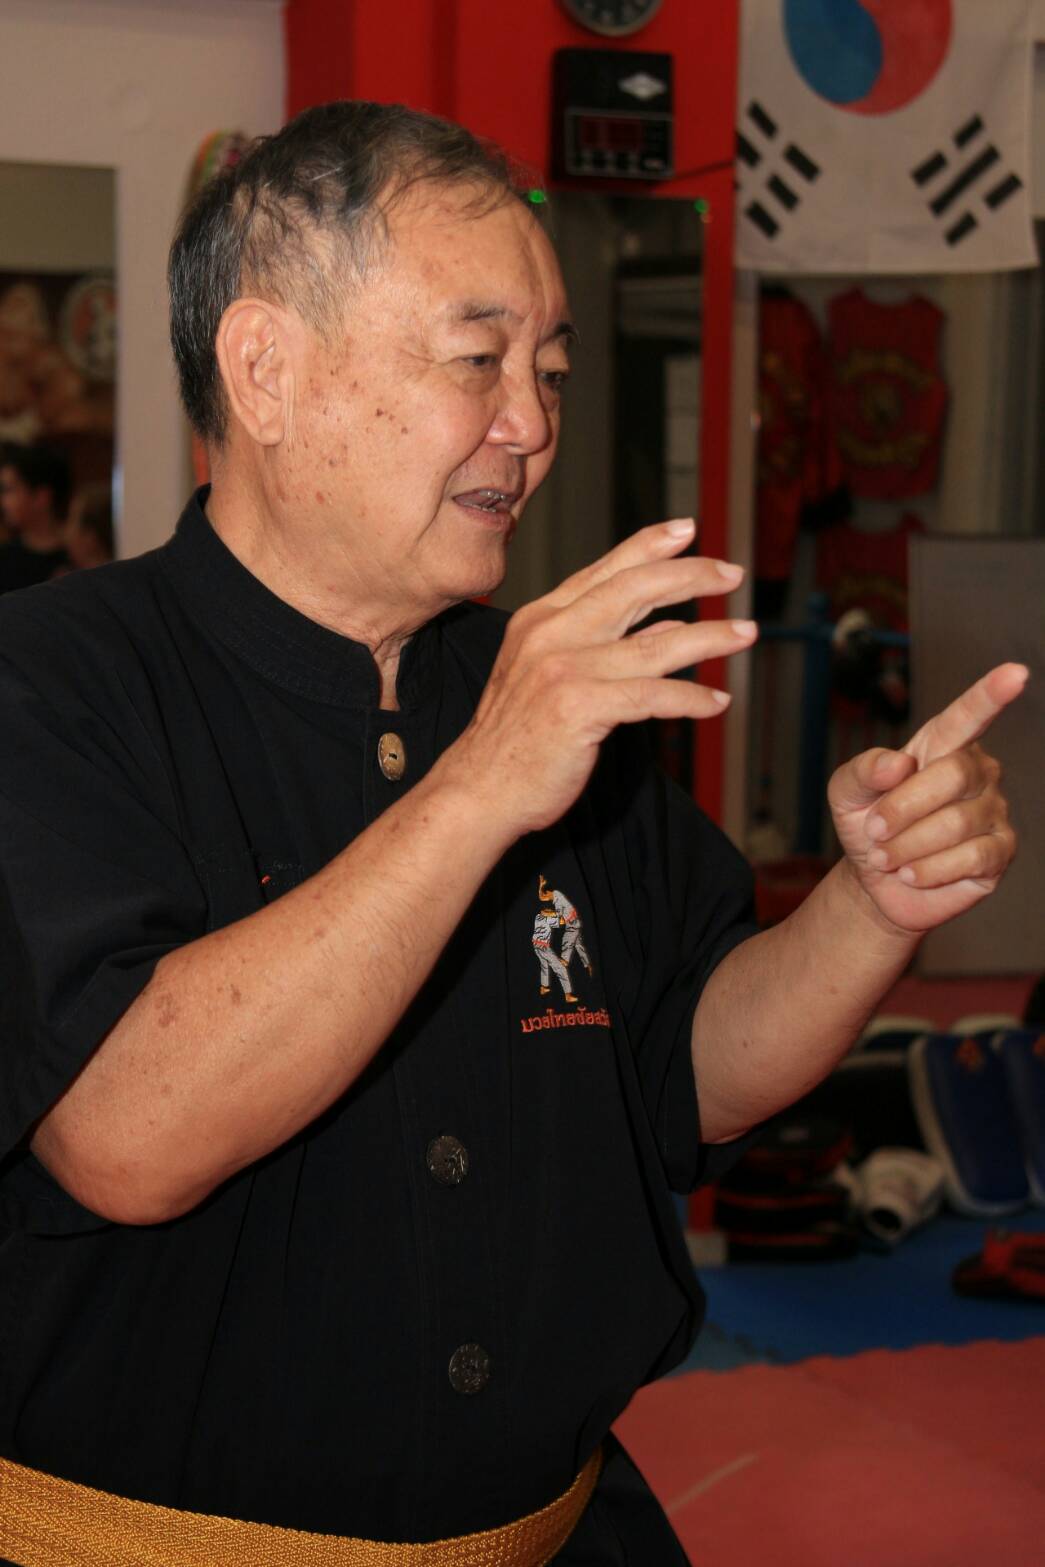 Question 6 Exclusive interview with Muay Thai Grand Master Chaisawat Tienviboon.